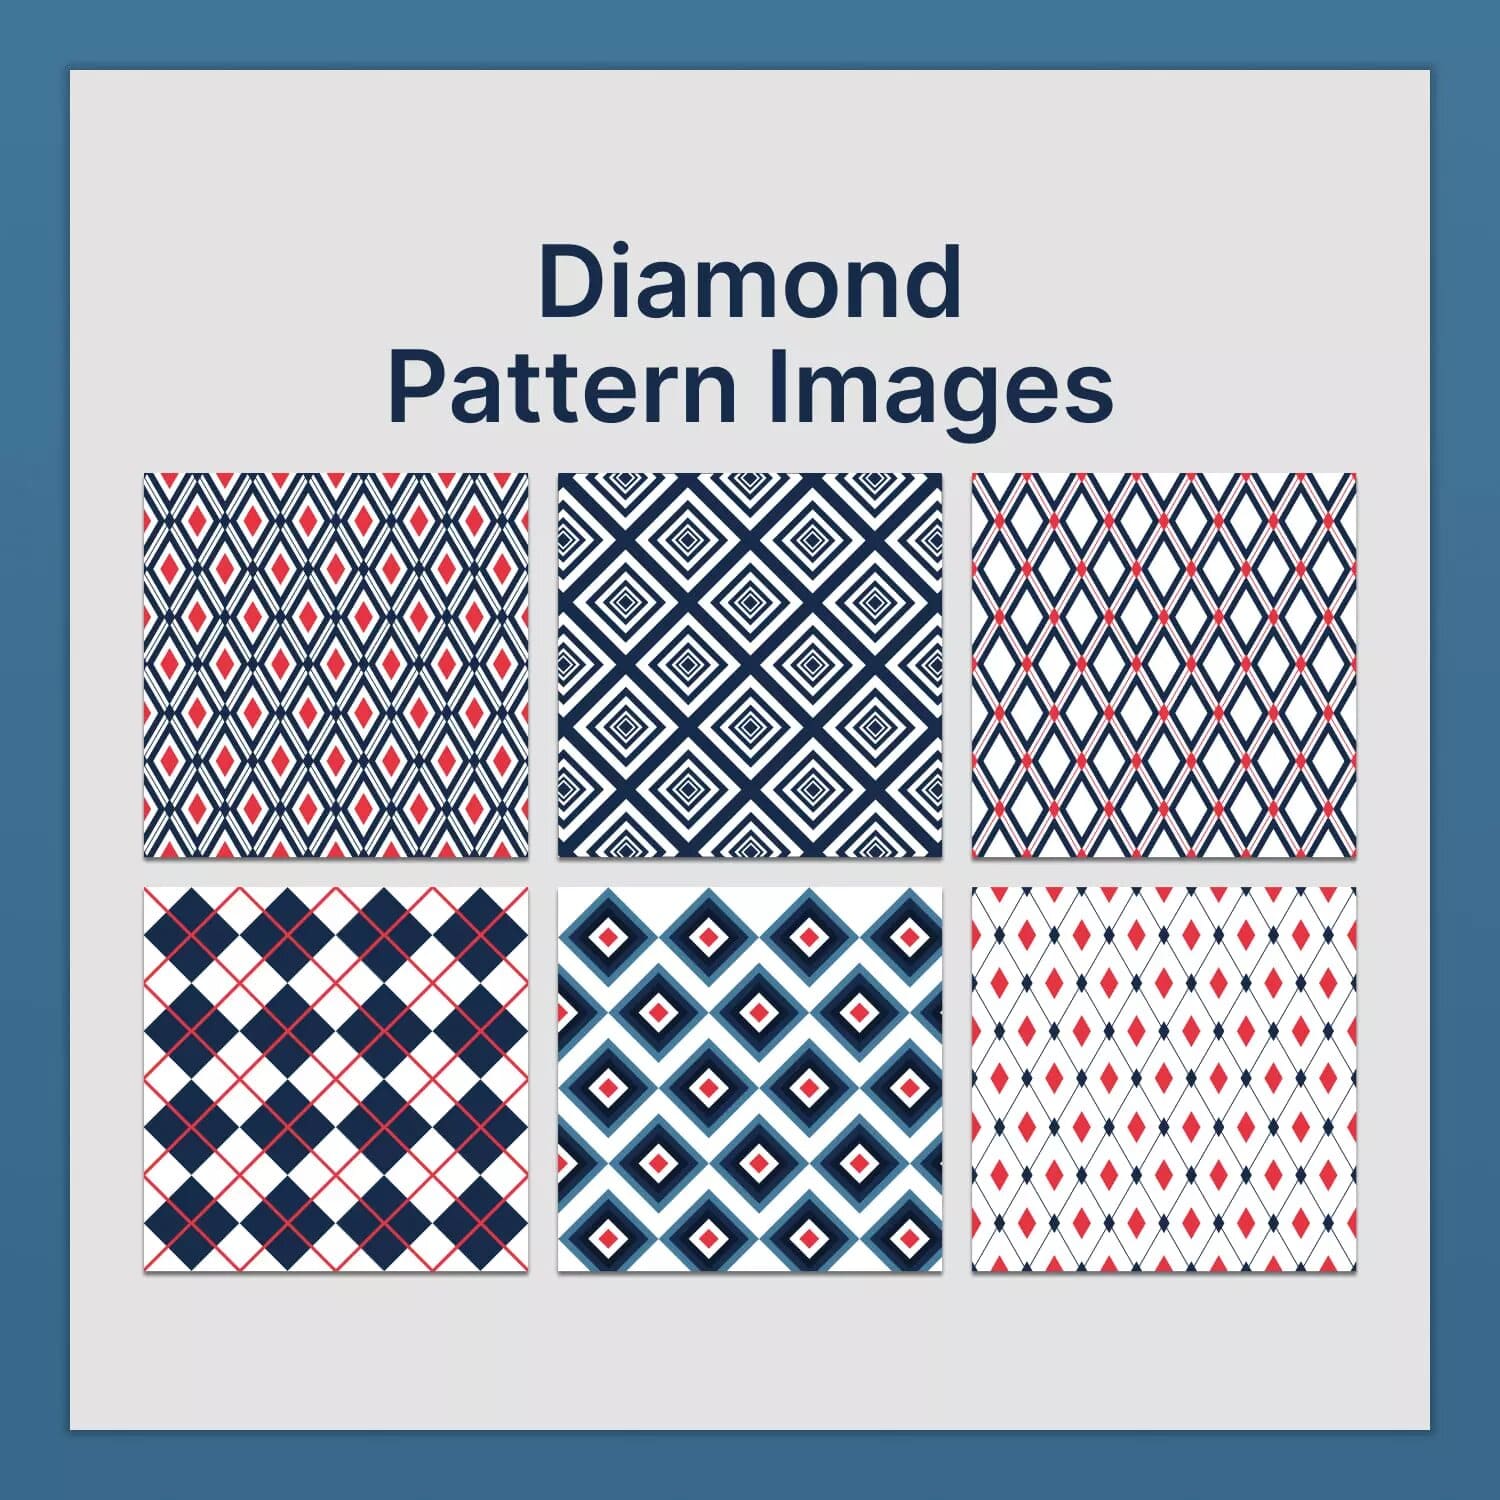 Diamond Pattern Images Preview 3.